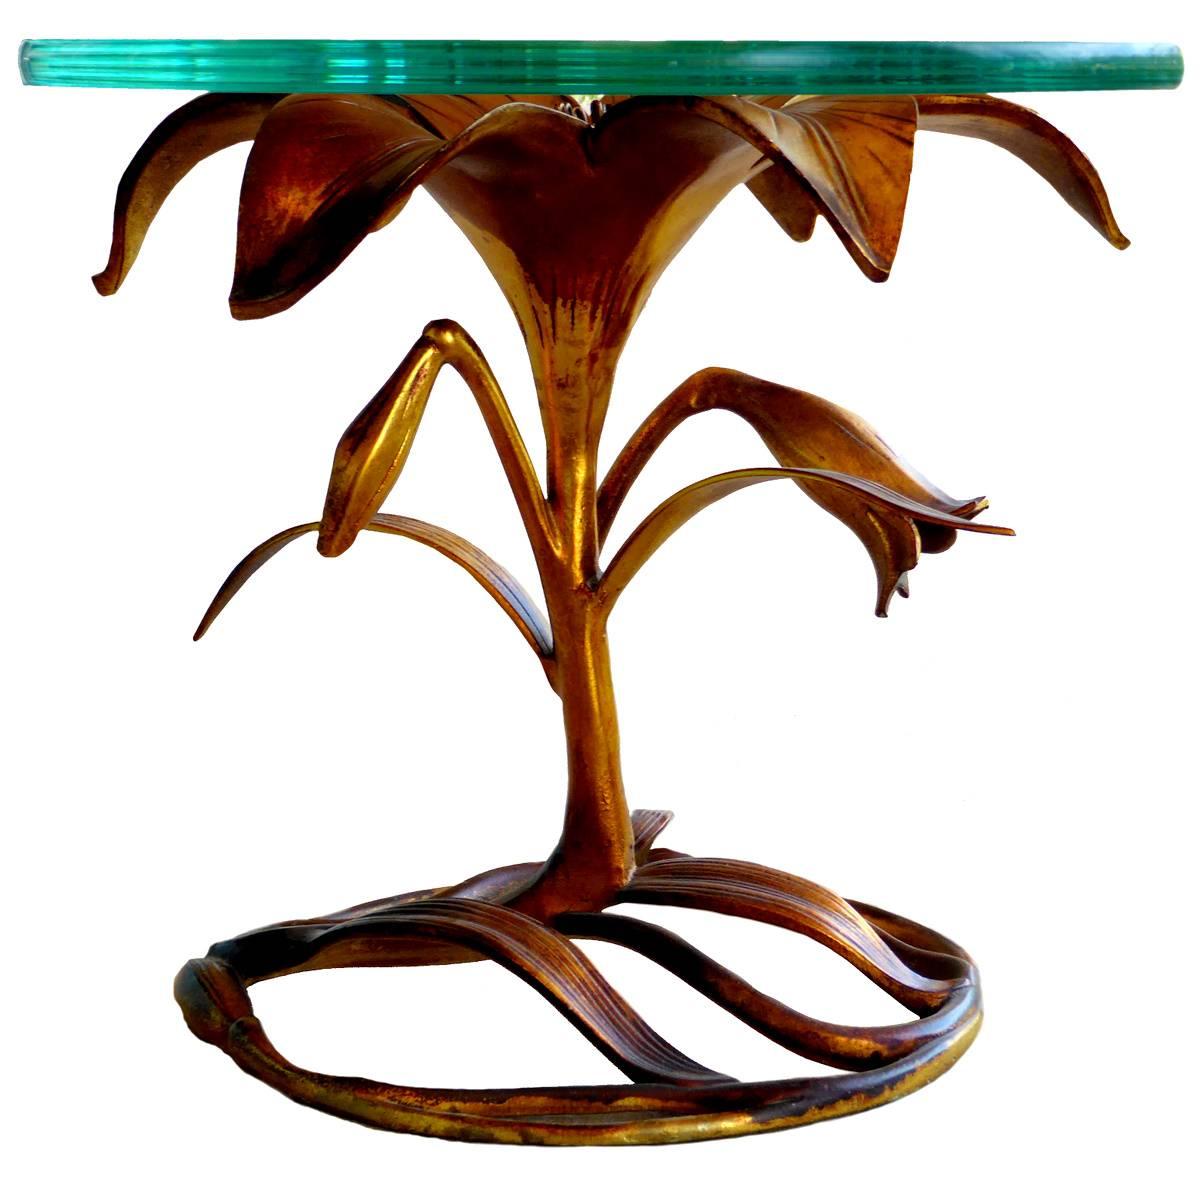 Often attributed to Arthur Court, this Lily occasional table by Drexel is a lovely vision of aluminum dipped in gold.

Although this example has an attractive patina to the metal, we have another that is bright gold, presumably due to being